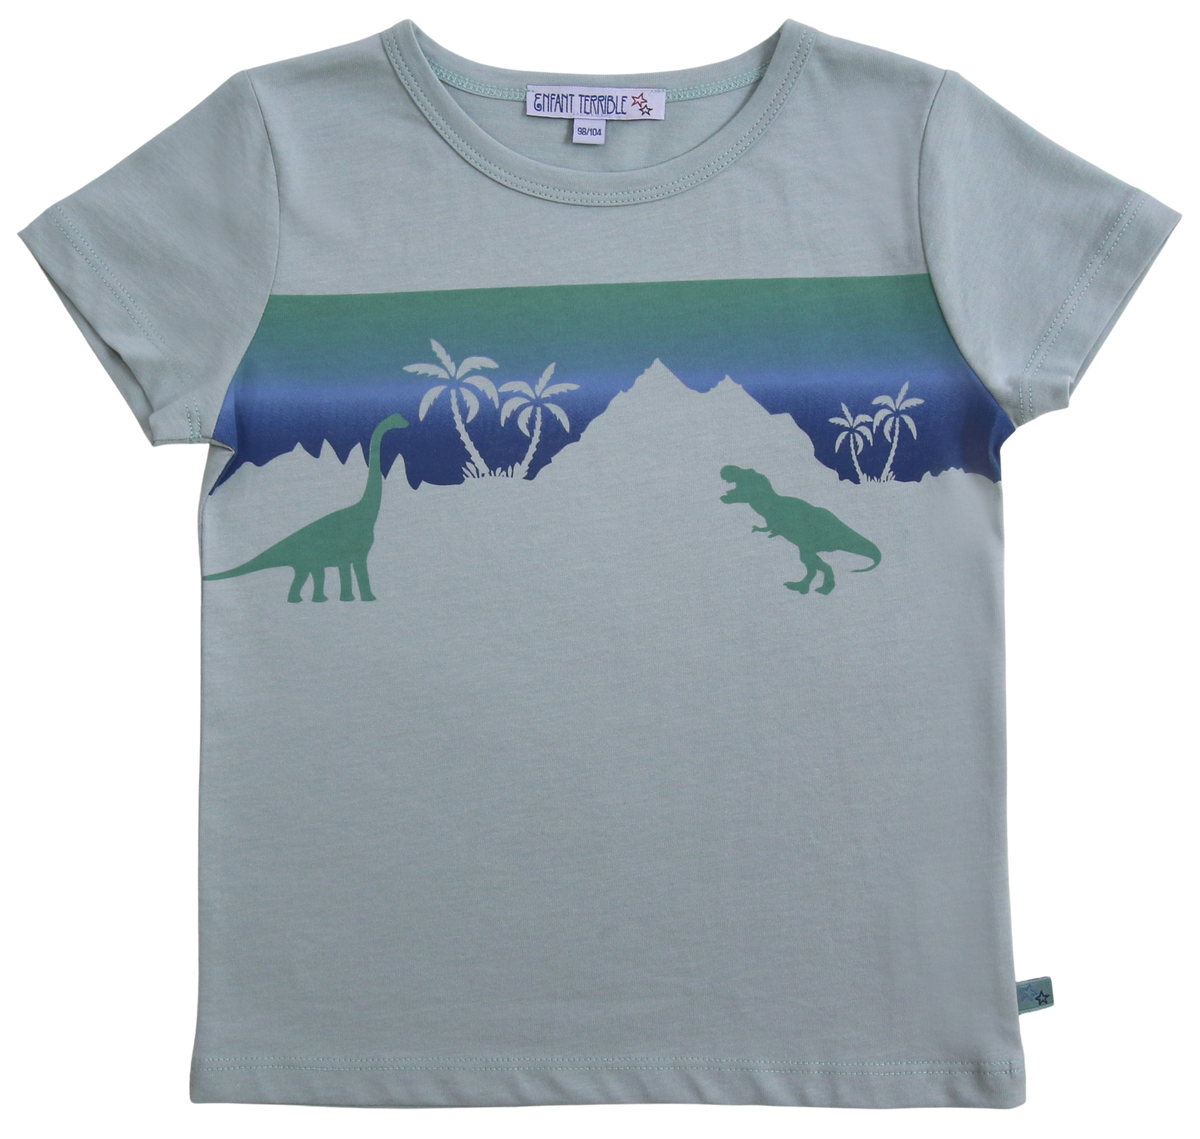 T-Shirt mit Dinos  in mint Enfant Terrible